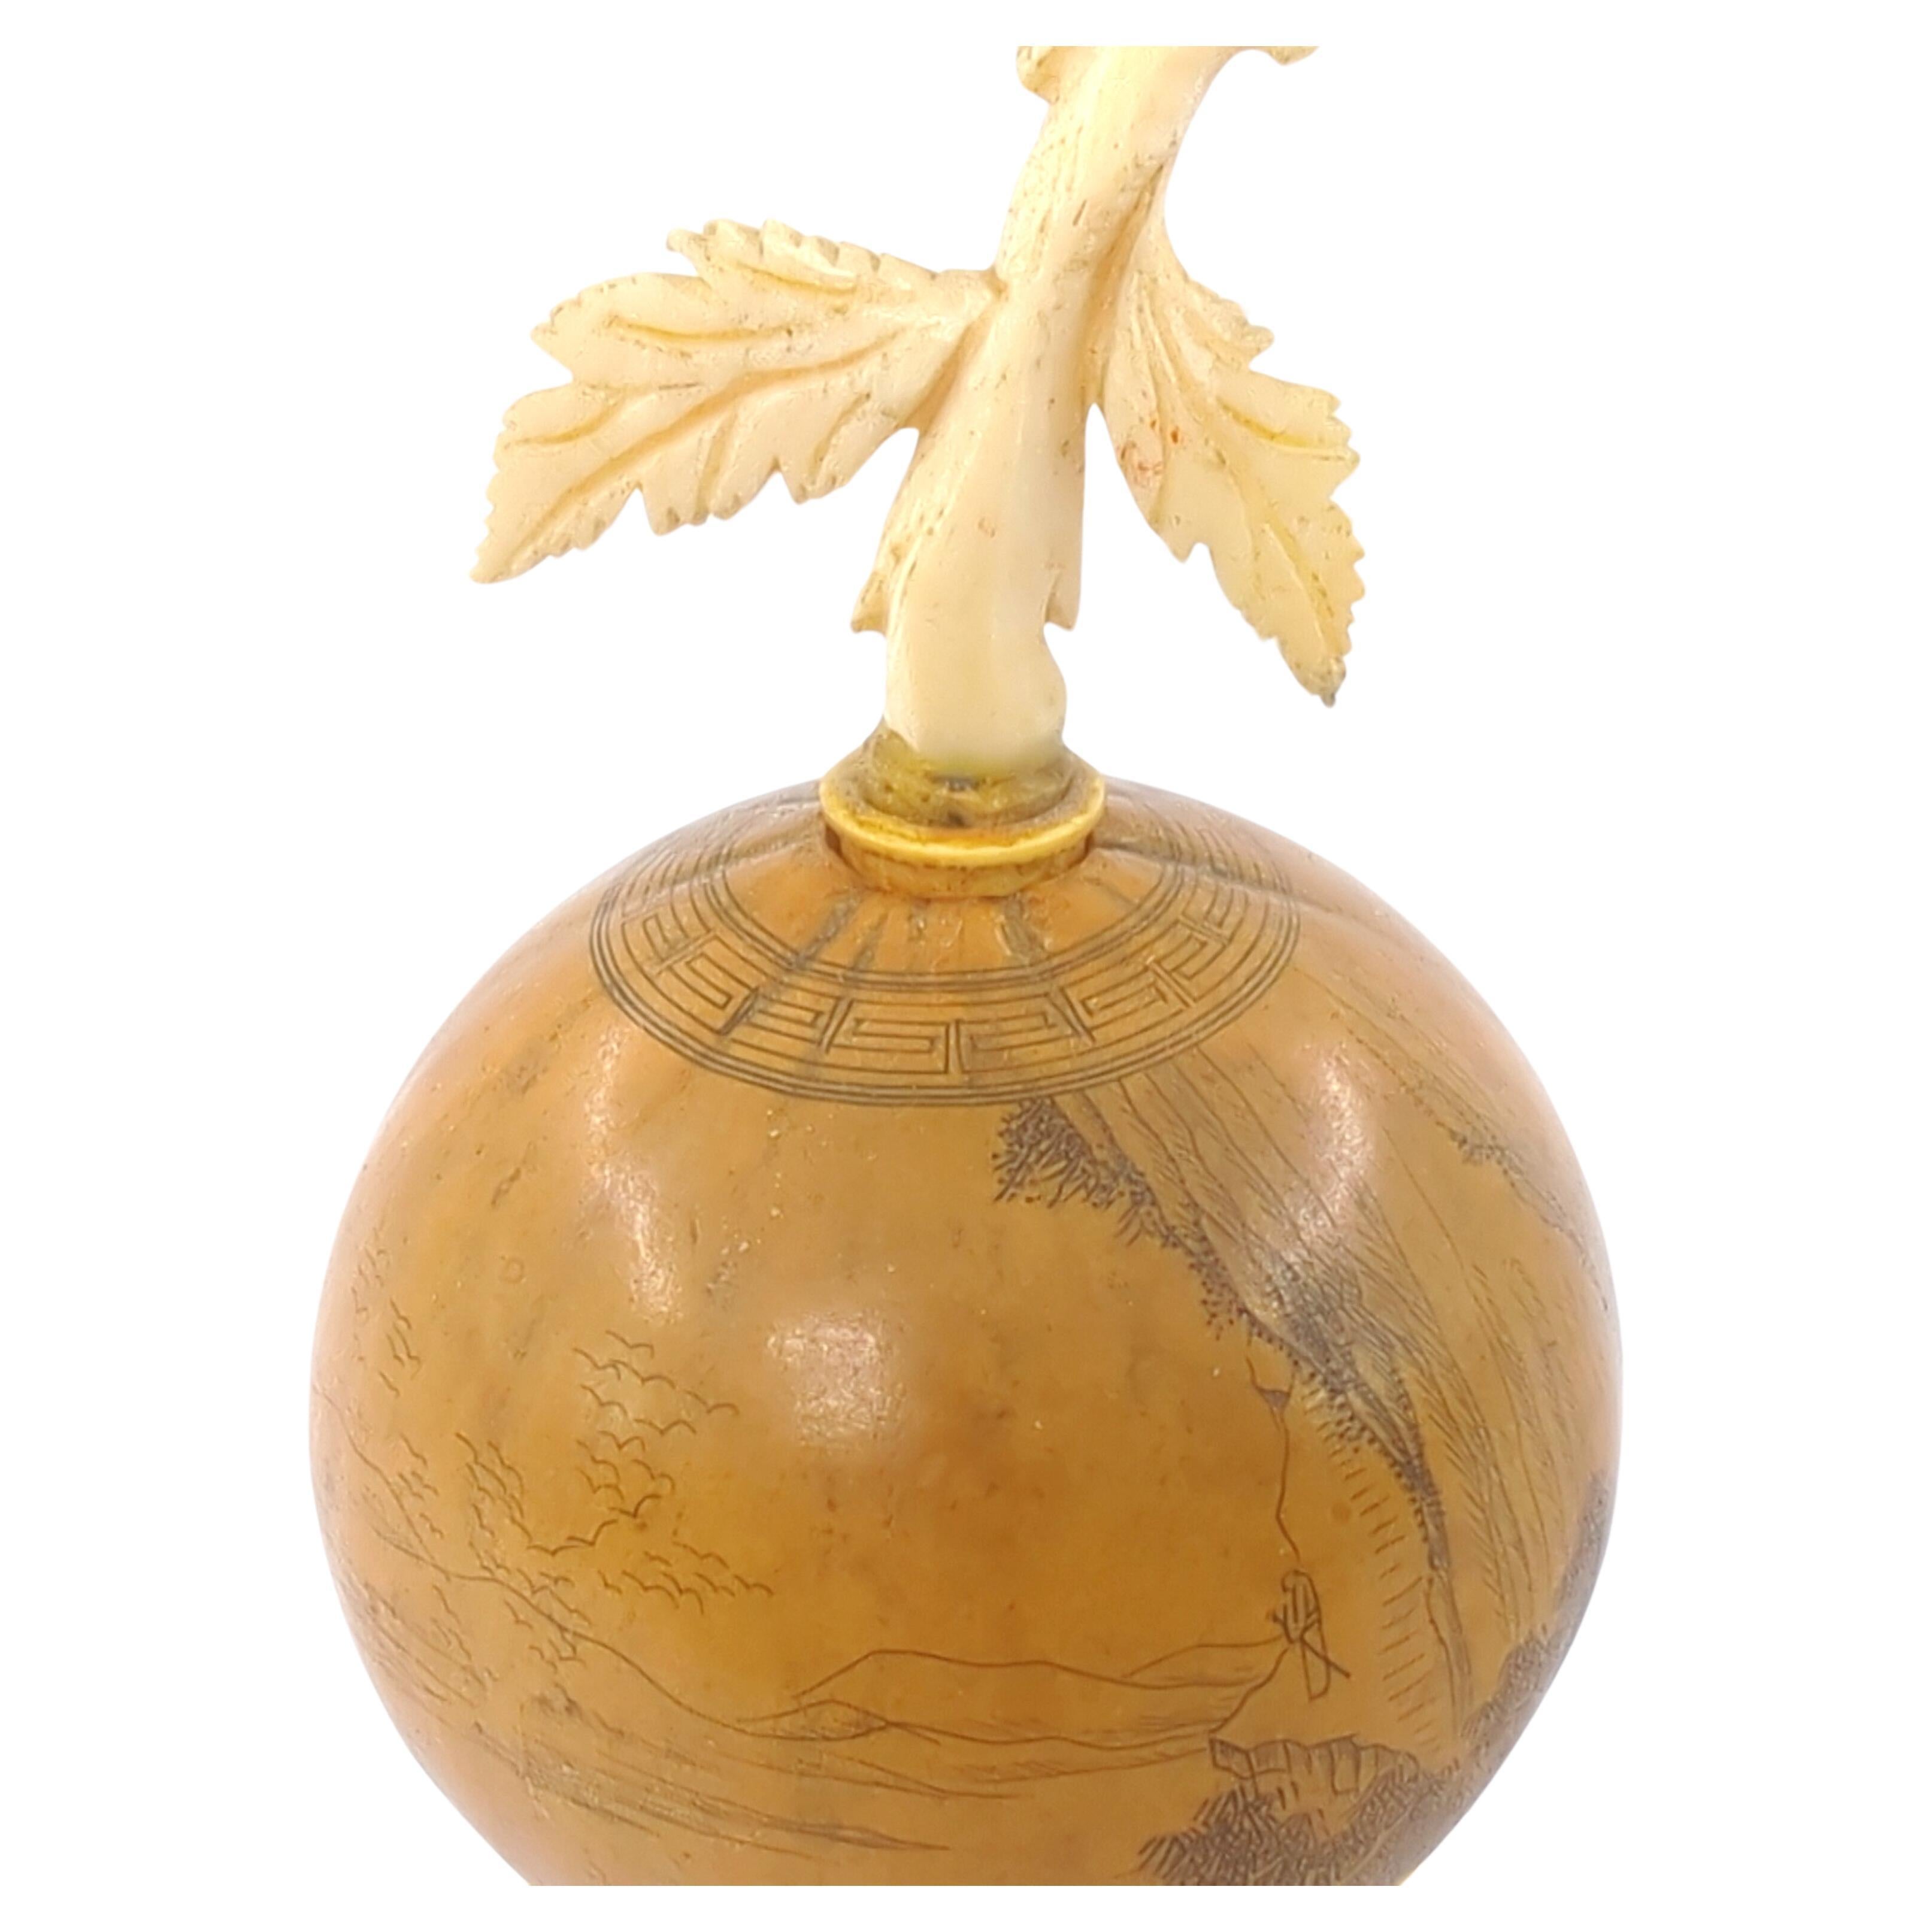 Important Chinese Incised & Filled Gourd Snuff Bottle 